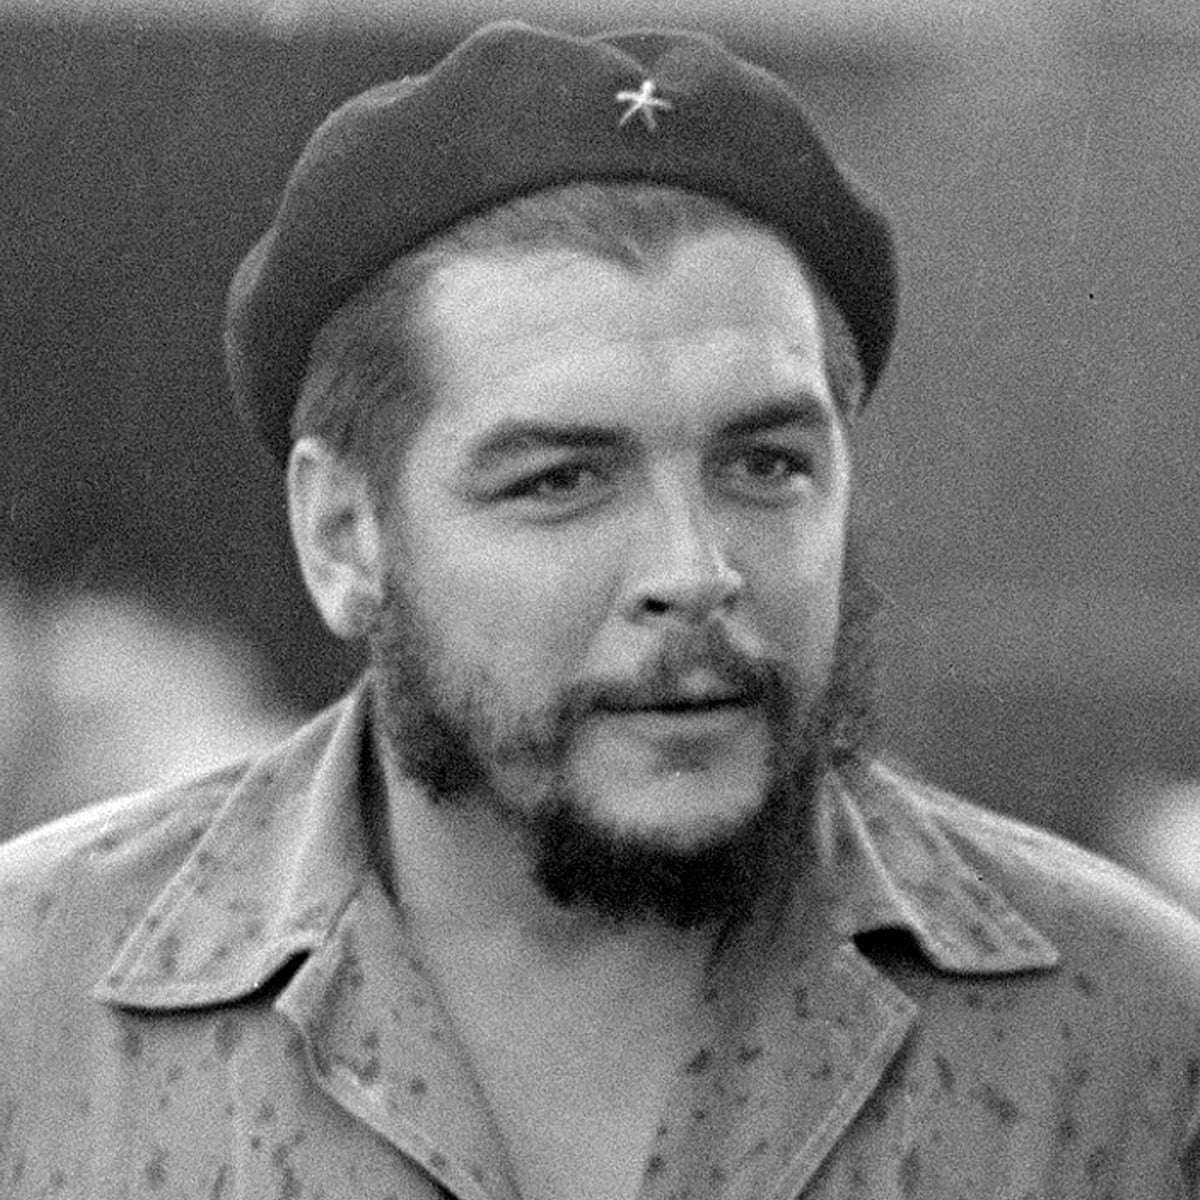 Bolivian soldier who killed Che Guevara dies at age 80 | Che ...